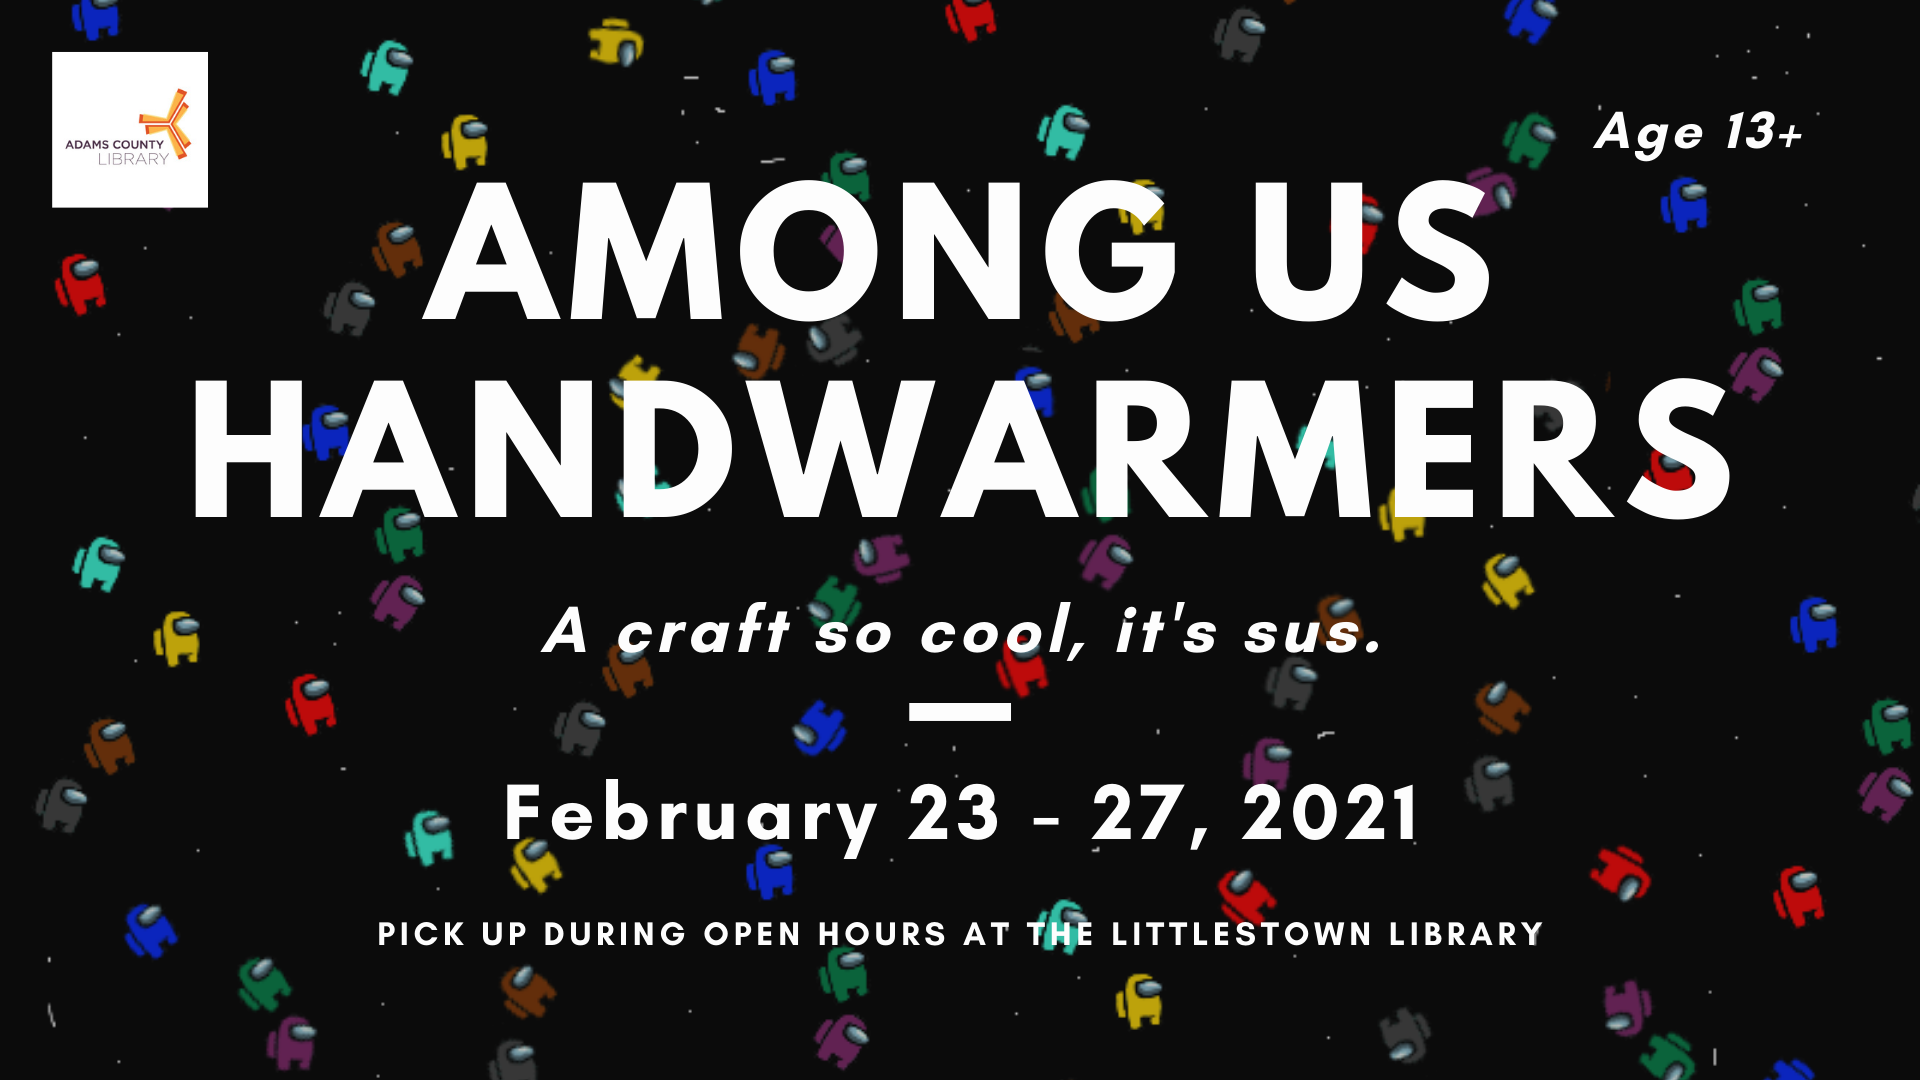 Pick up supplies for our Among Us Handwarmers craft from February 23 to February 27, 2021 at the Littlestown Library.